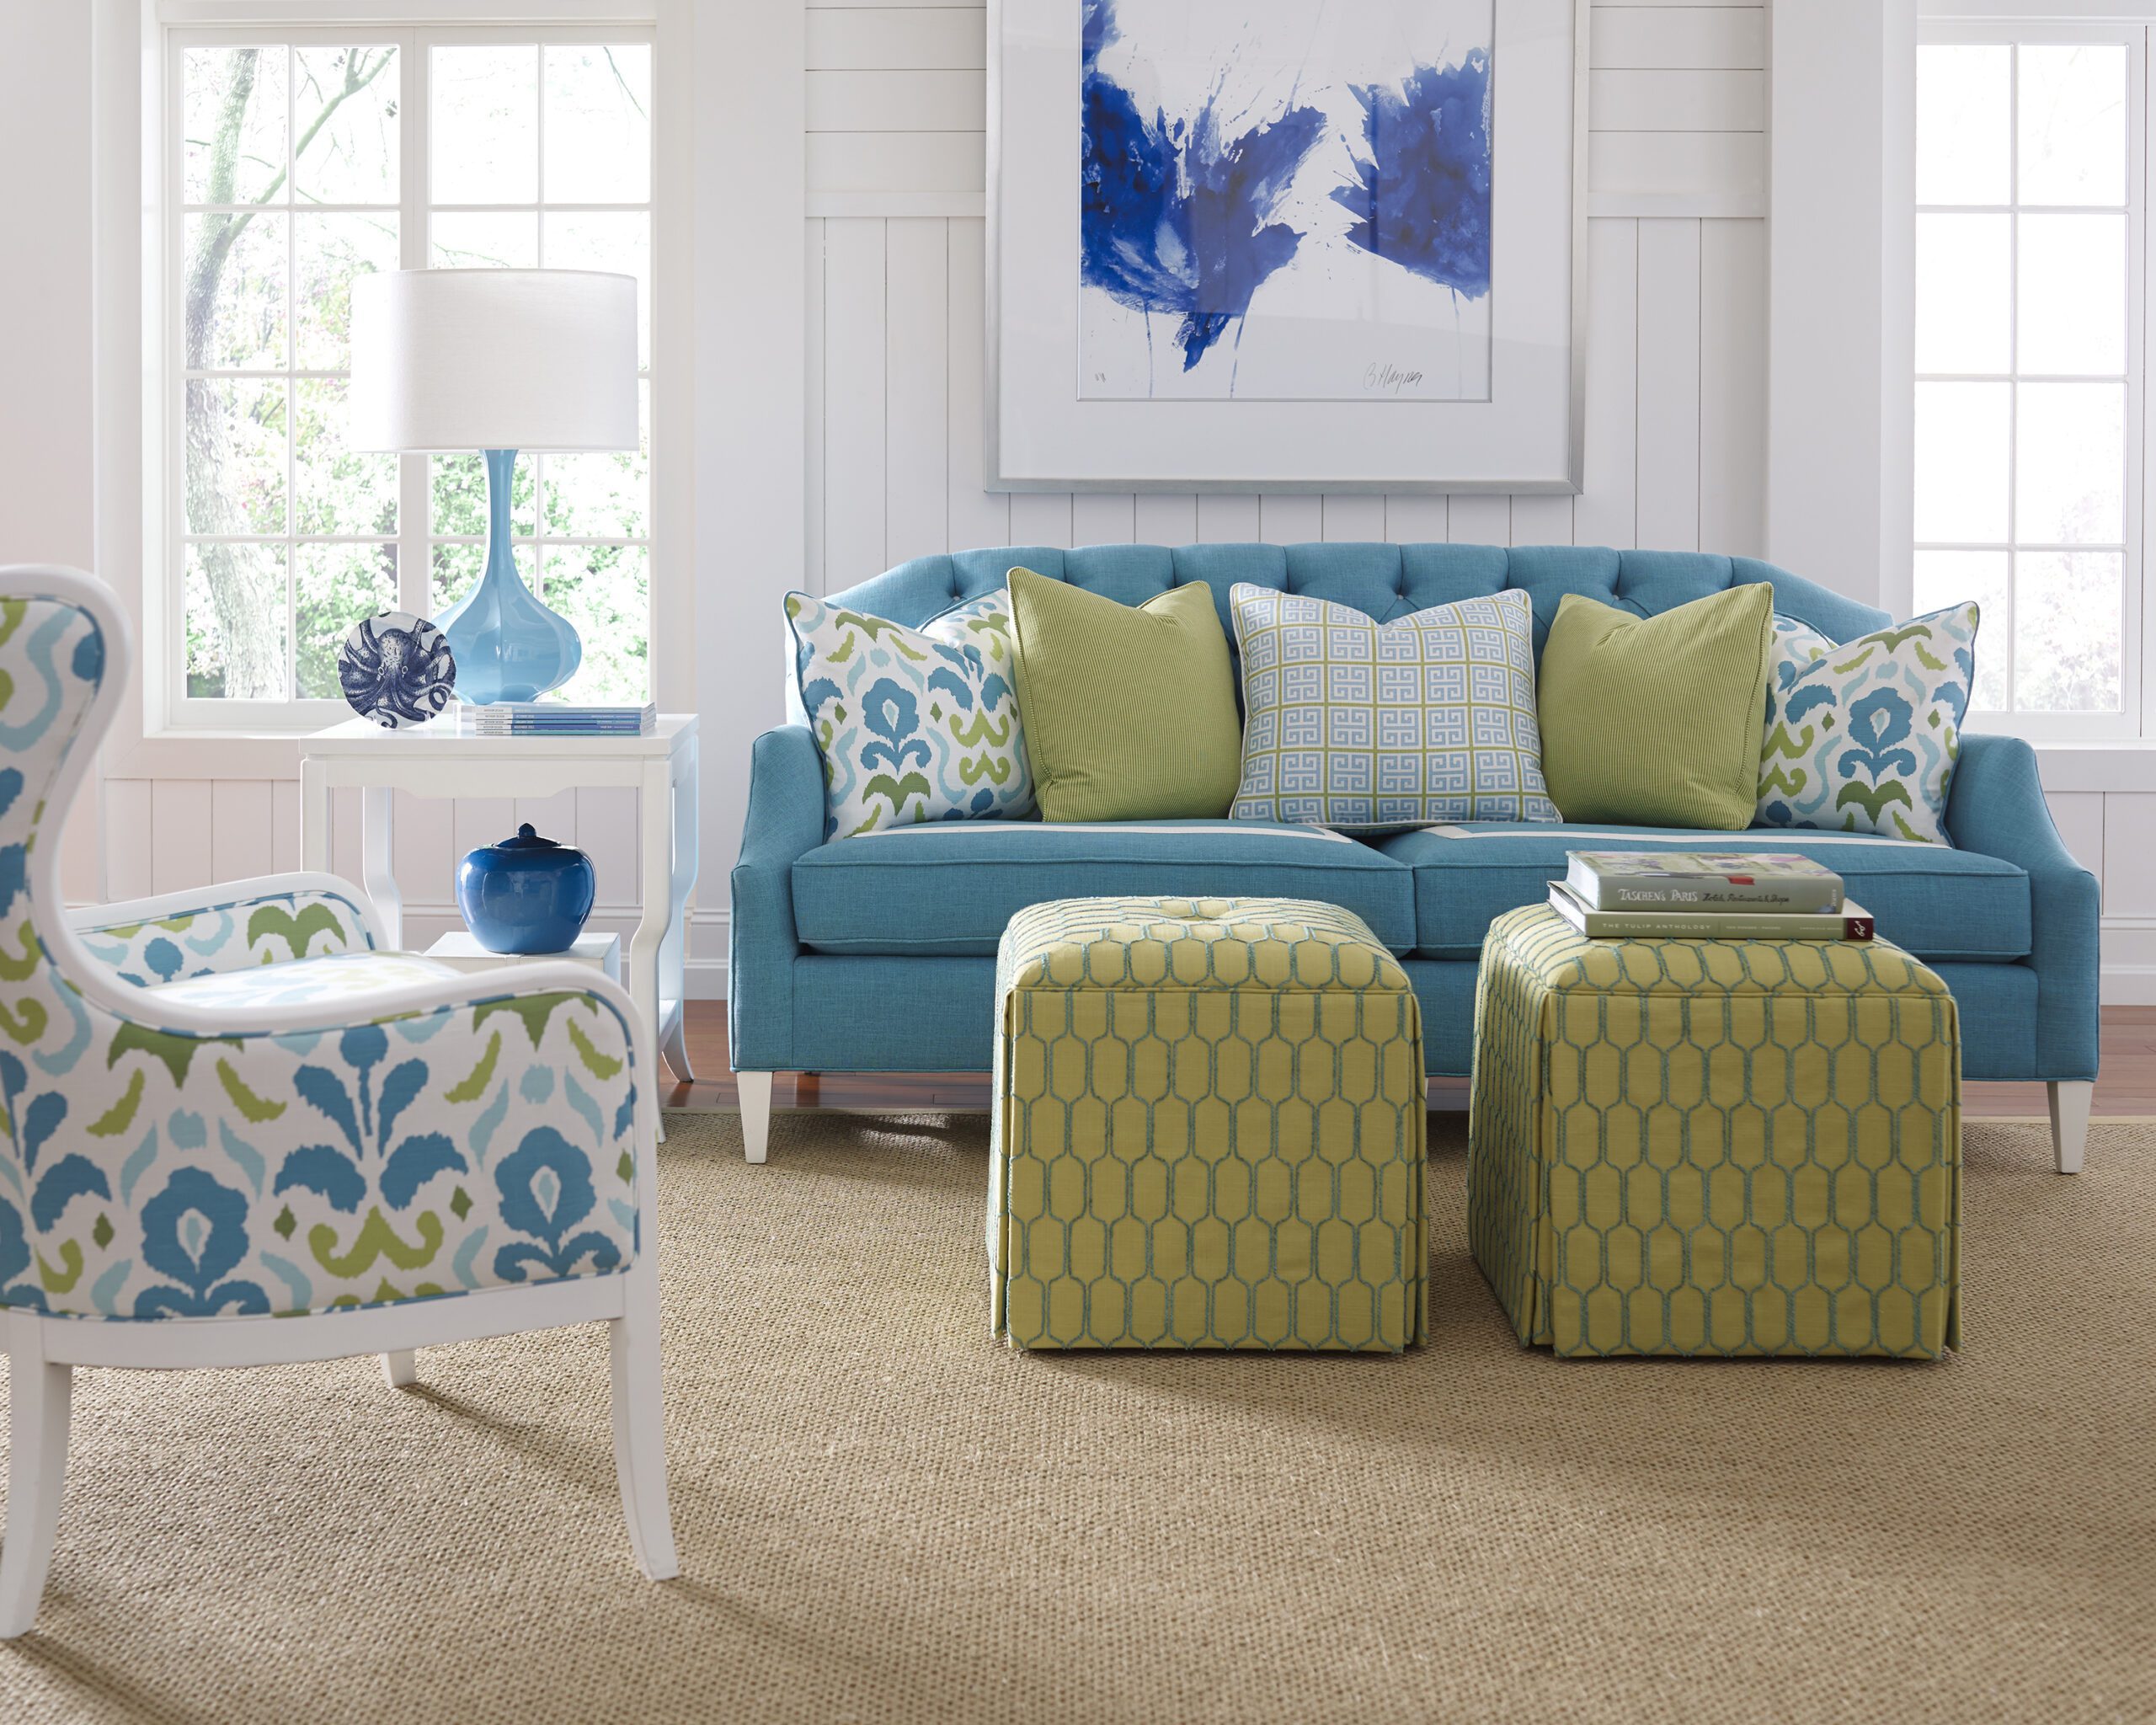 a blue couch with green ottomans in a living room